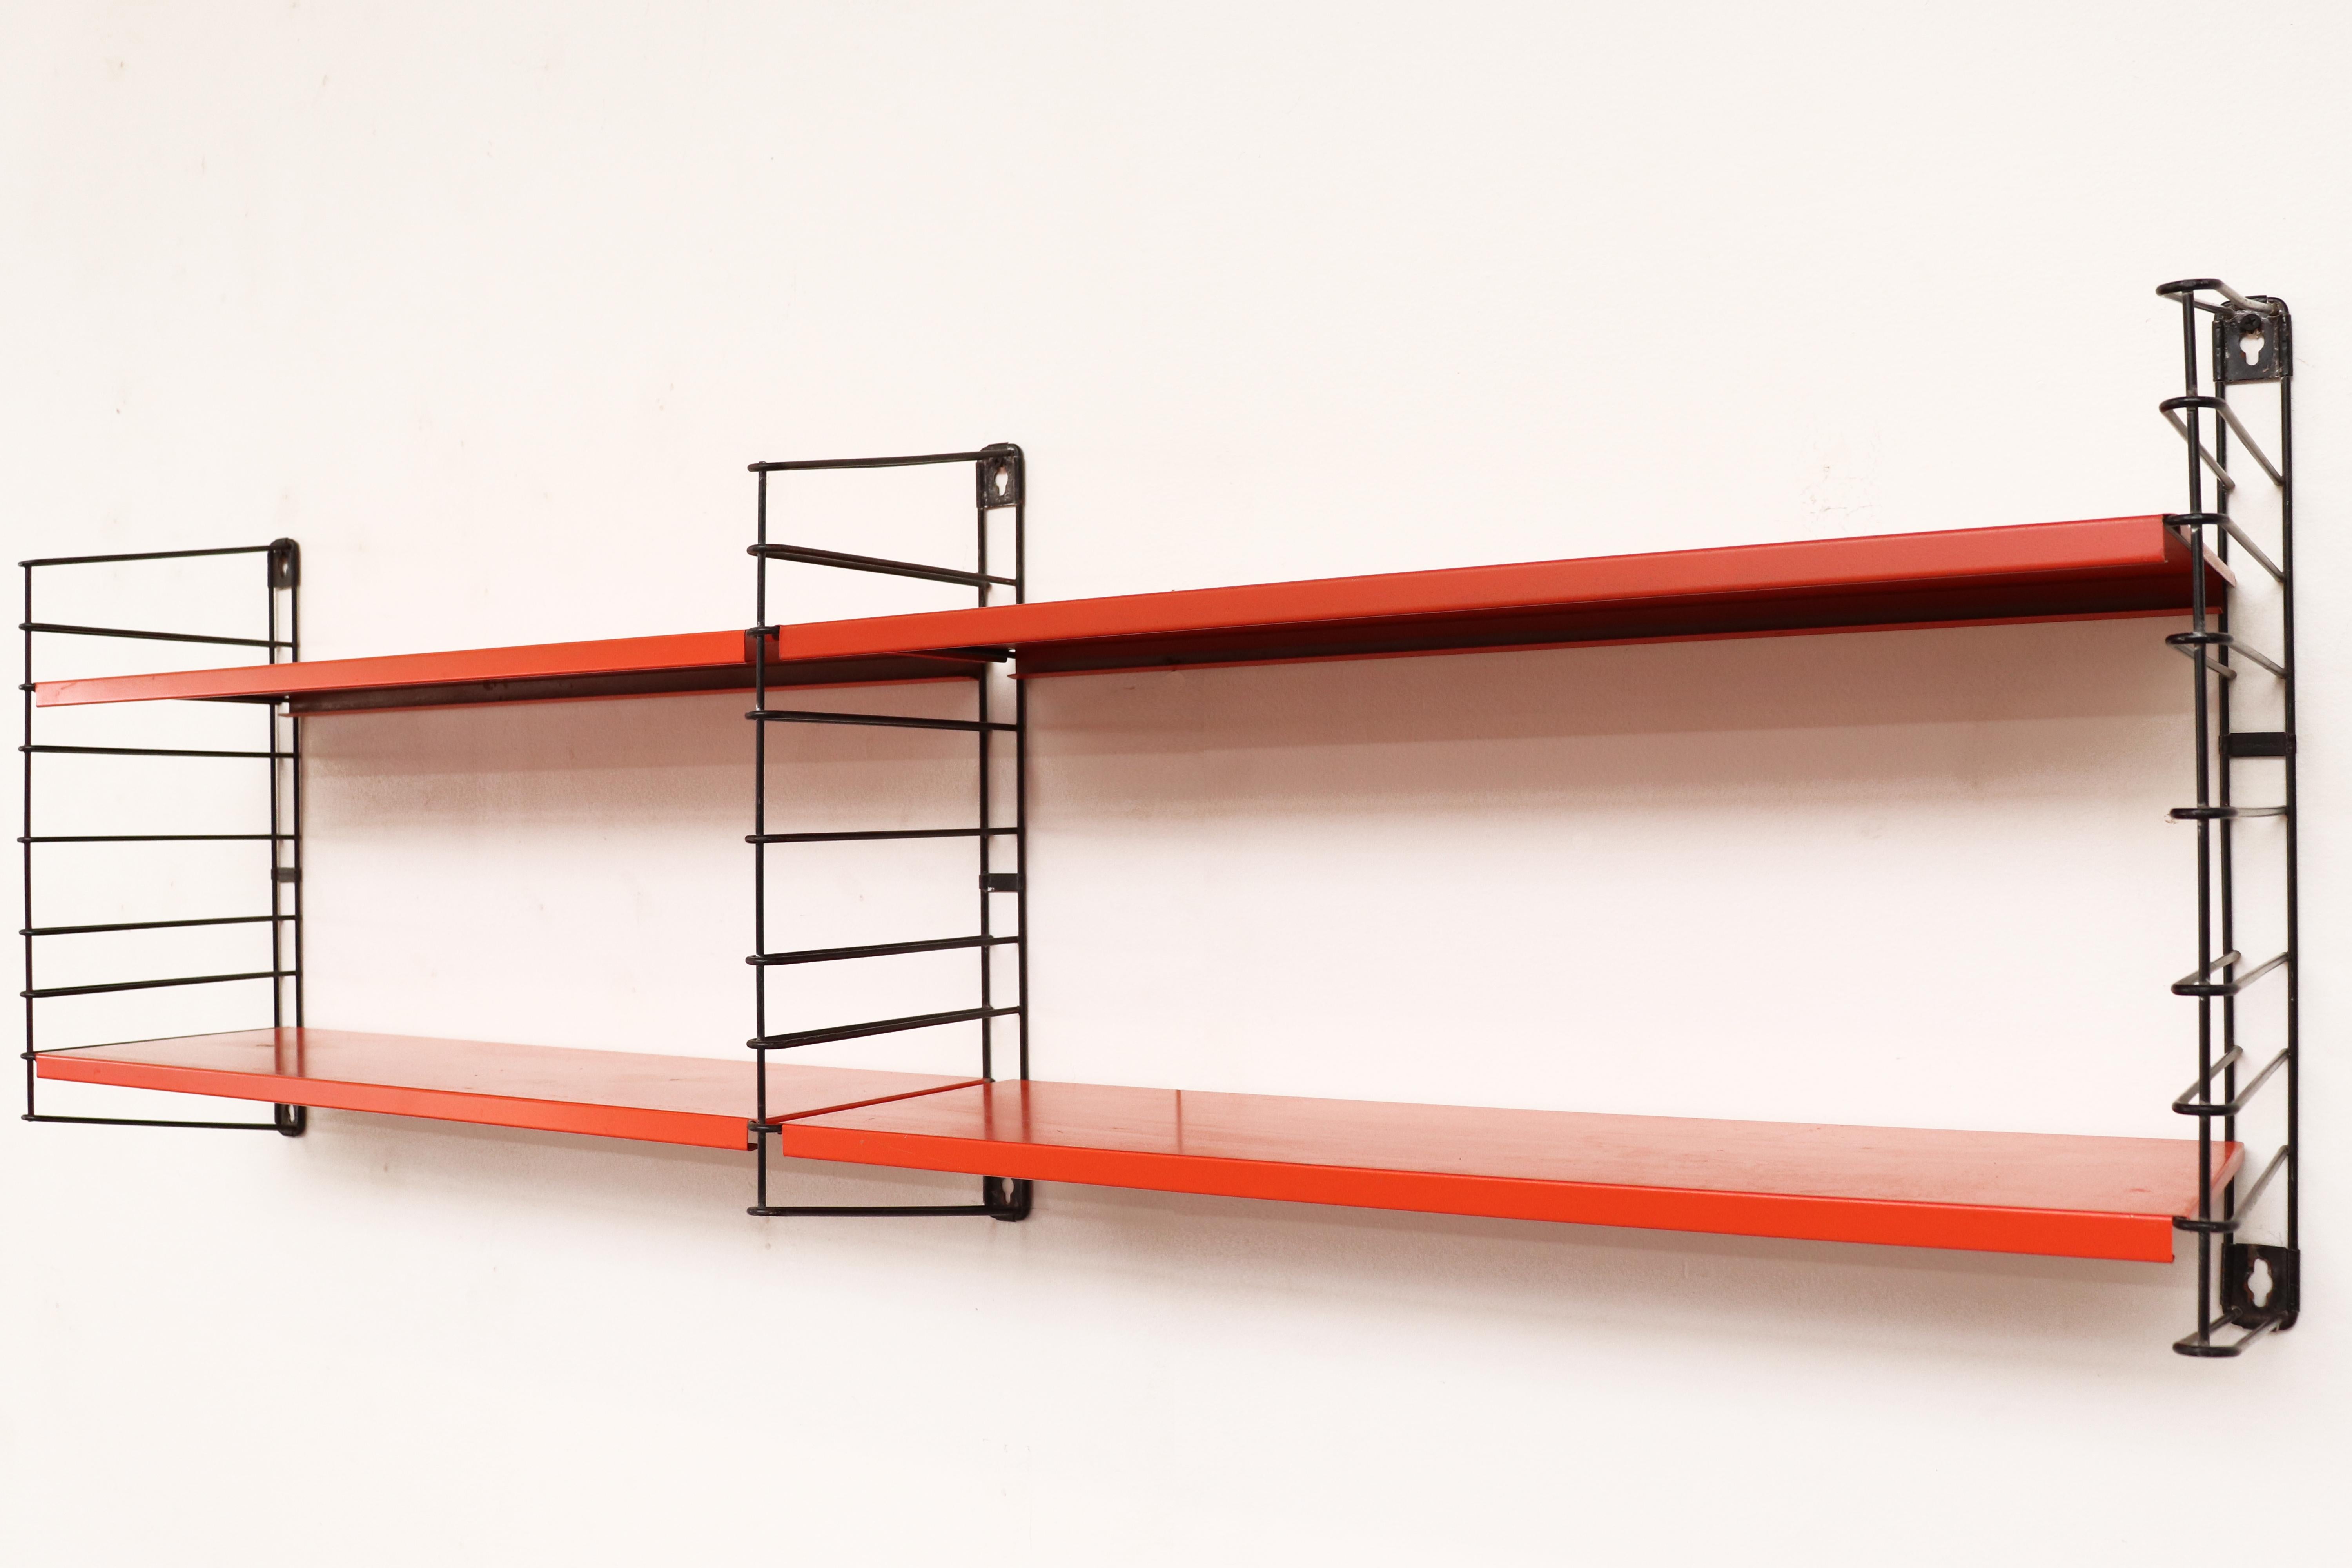 Tomado short two-section industrial shelving unit by Jan Van Der Togt. Orange enameled metal shelves and black enameled metal risers. In original condition with visible wear and some enamel loss.